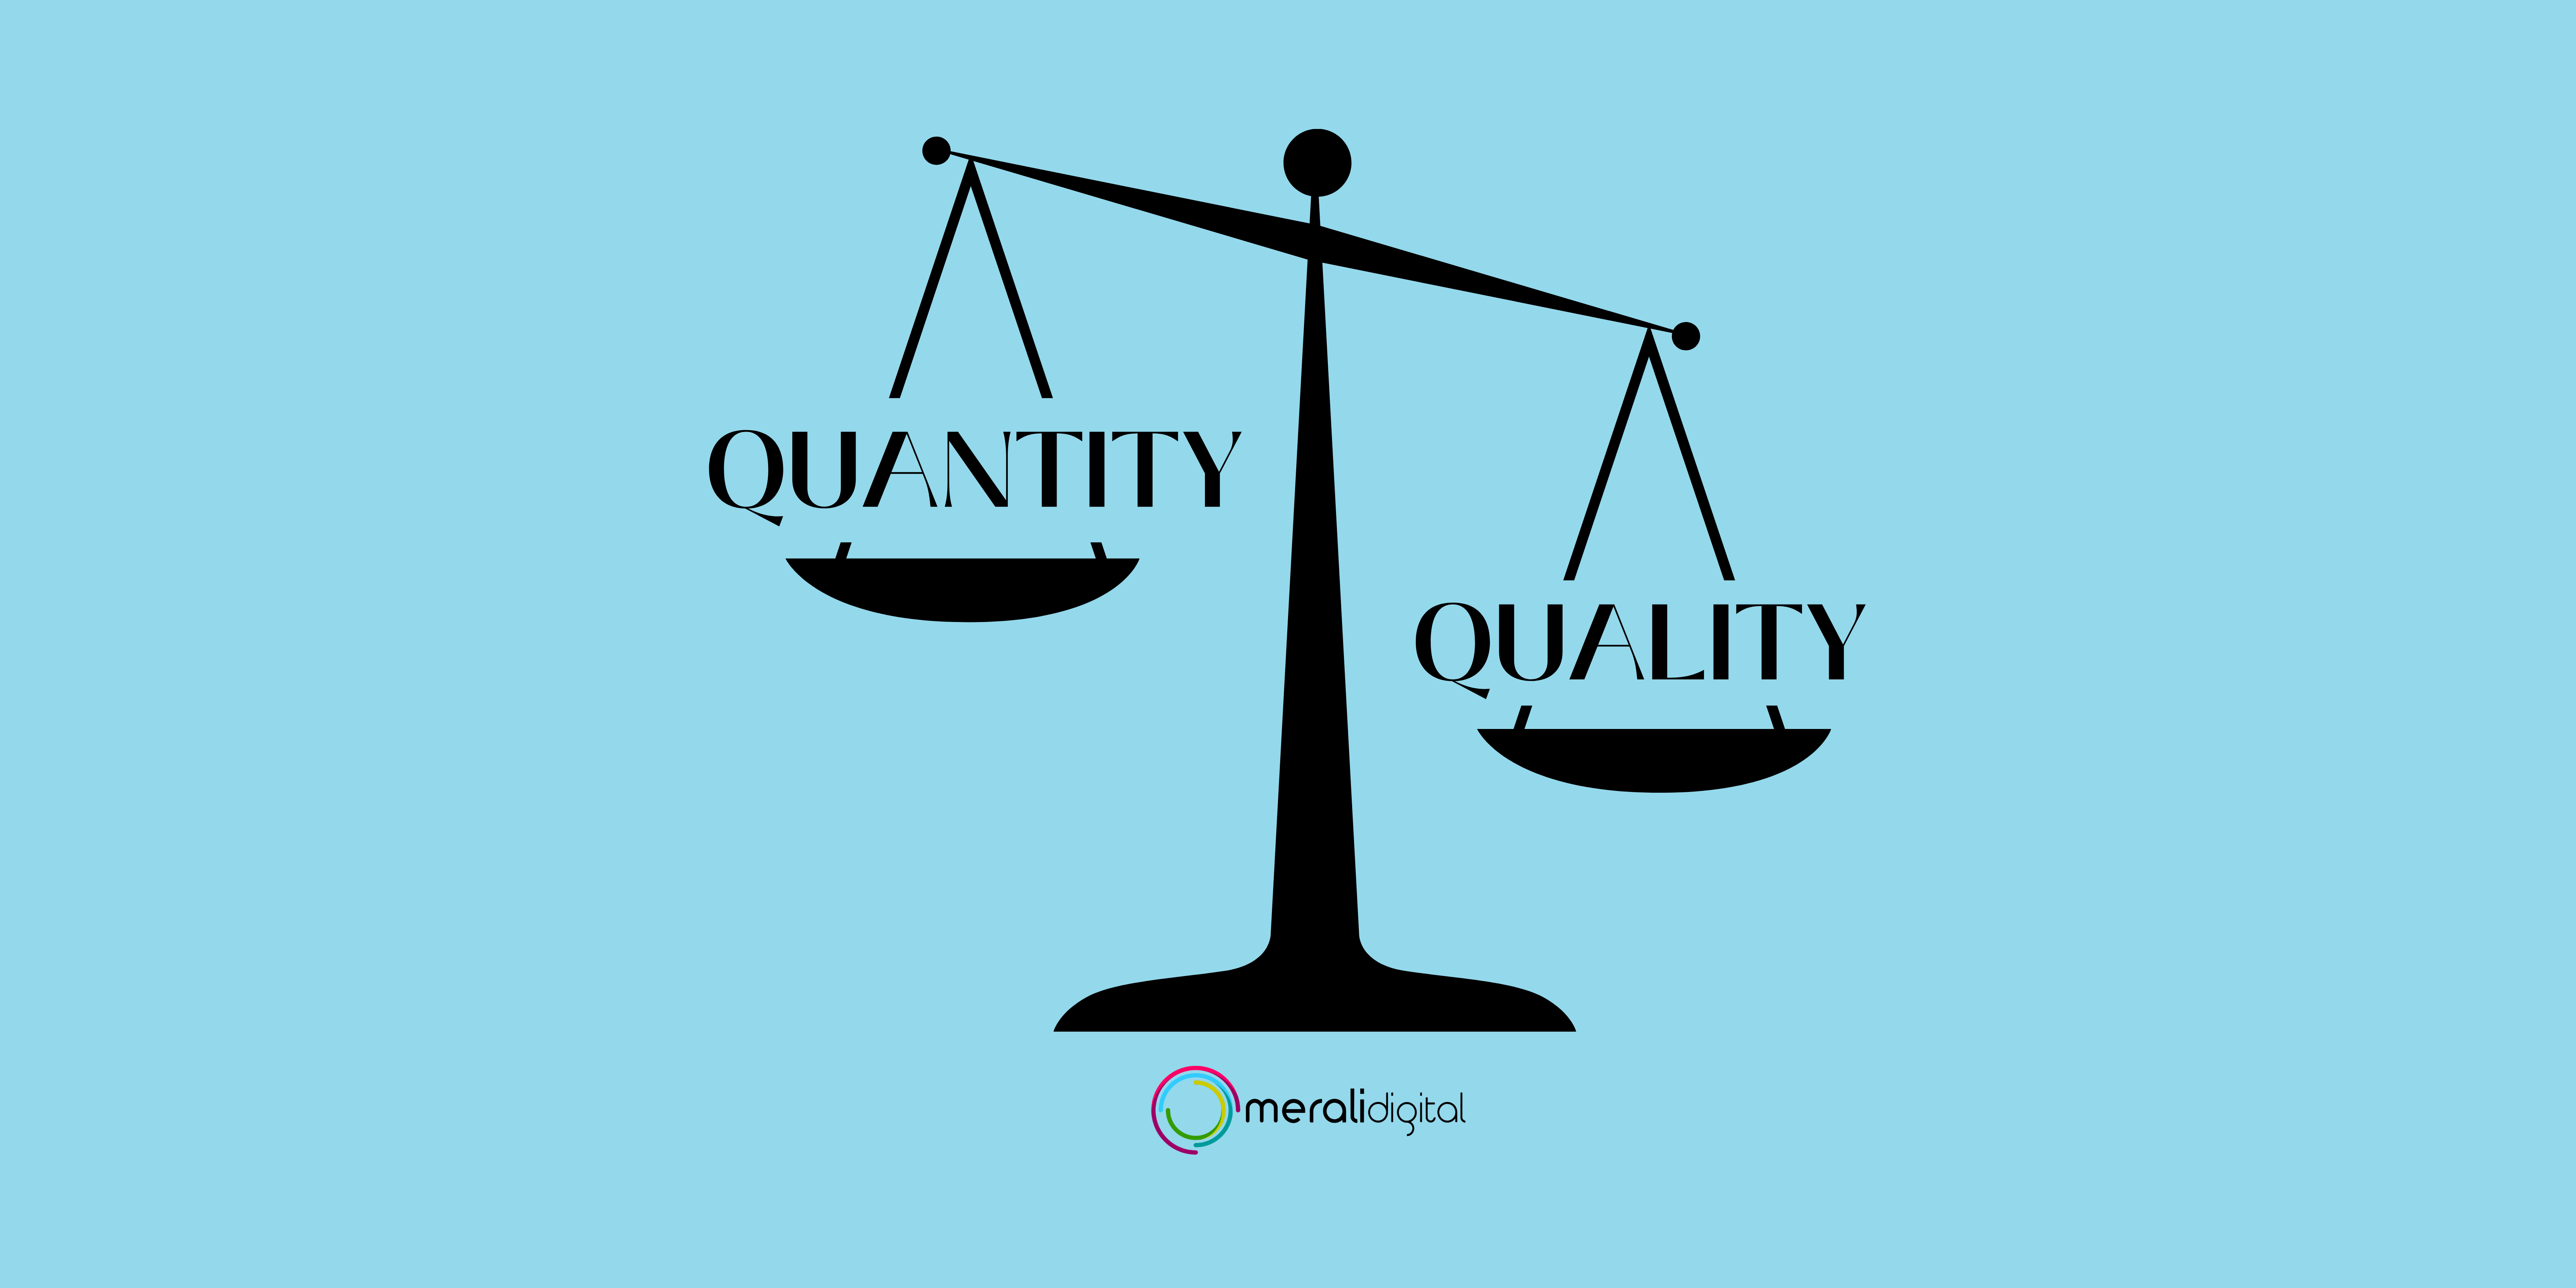 Scale with the word 'quality' on the left and 'quantity' on the right